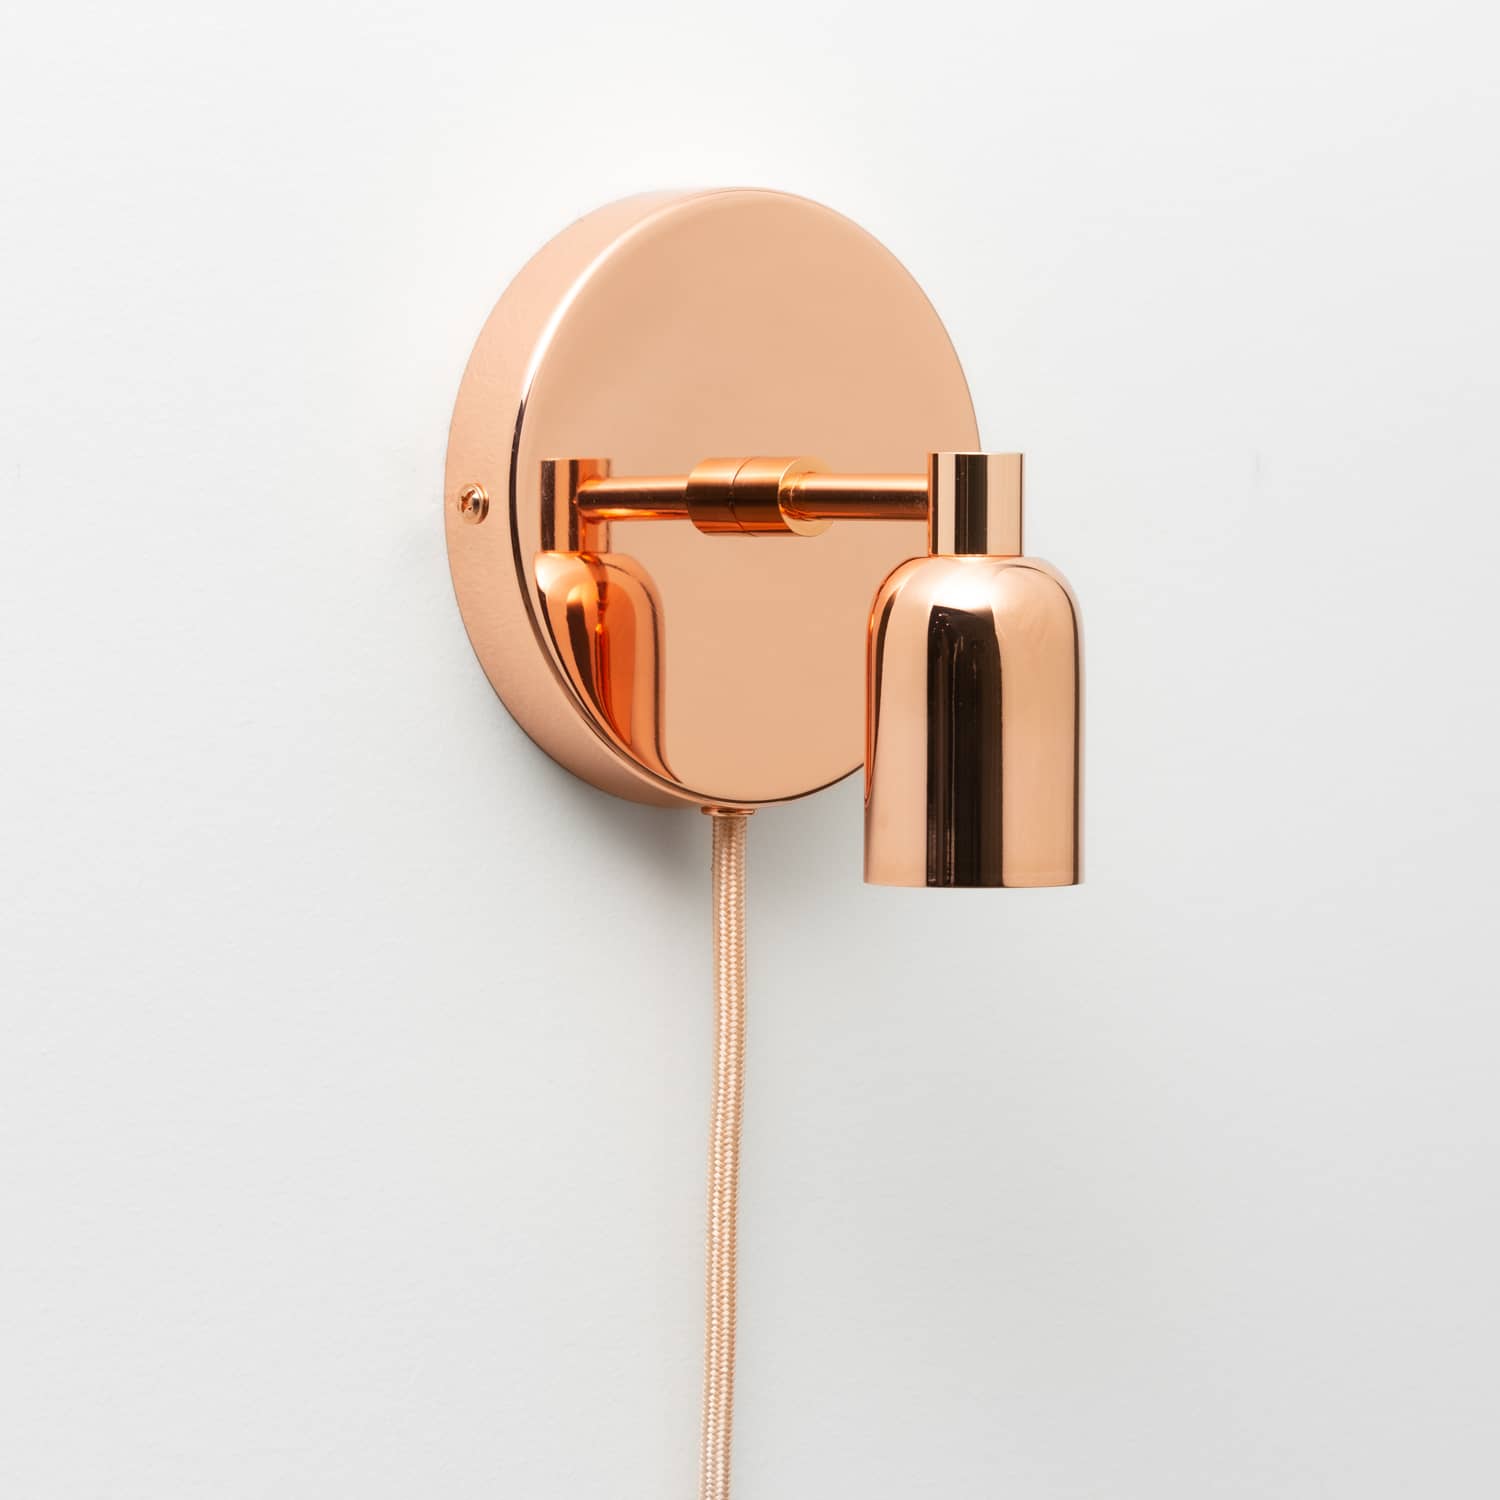 Junction Mini Solo Plug-In Sconce in Polished Copper finish 